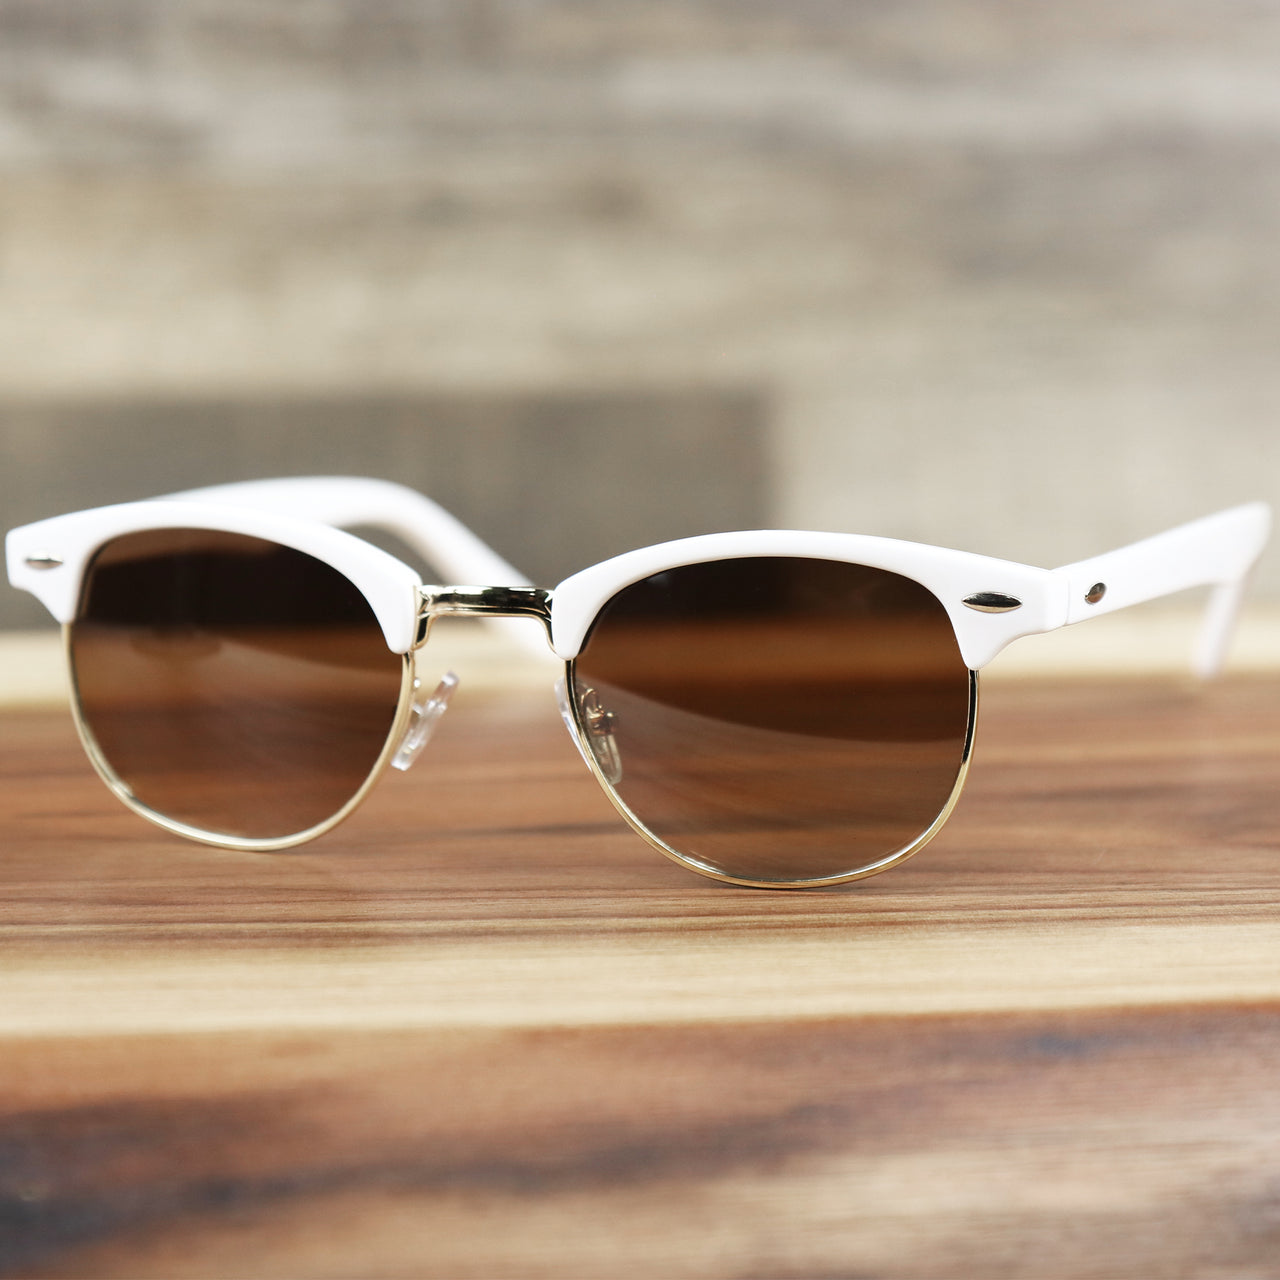 The Round Frame Brown Gradient Lens Sunglasses with White Gold Frame